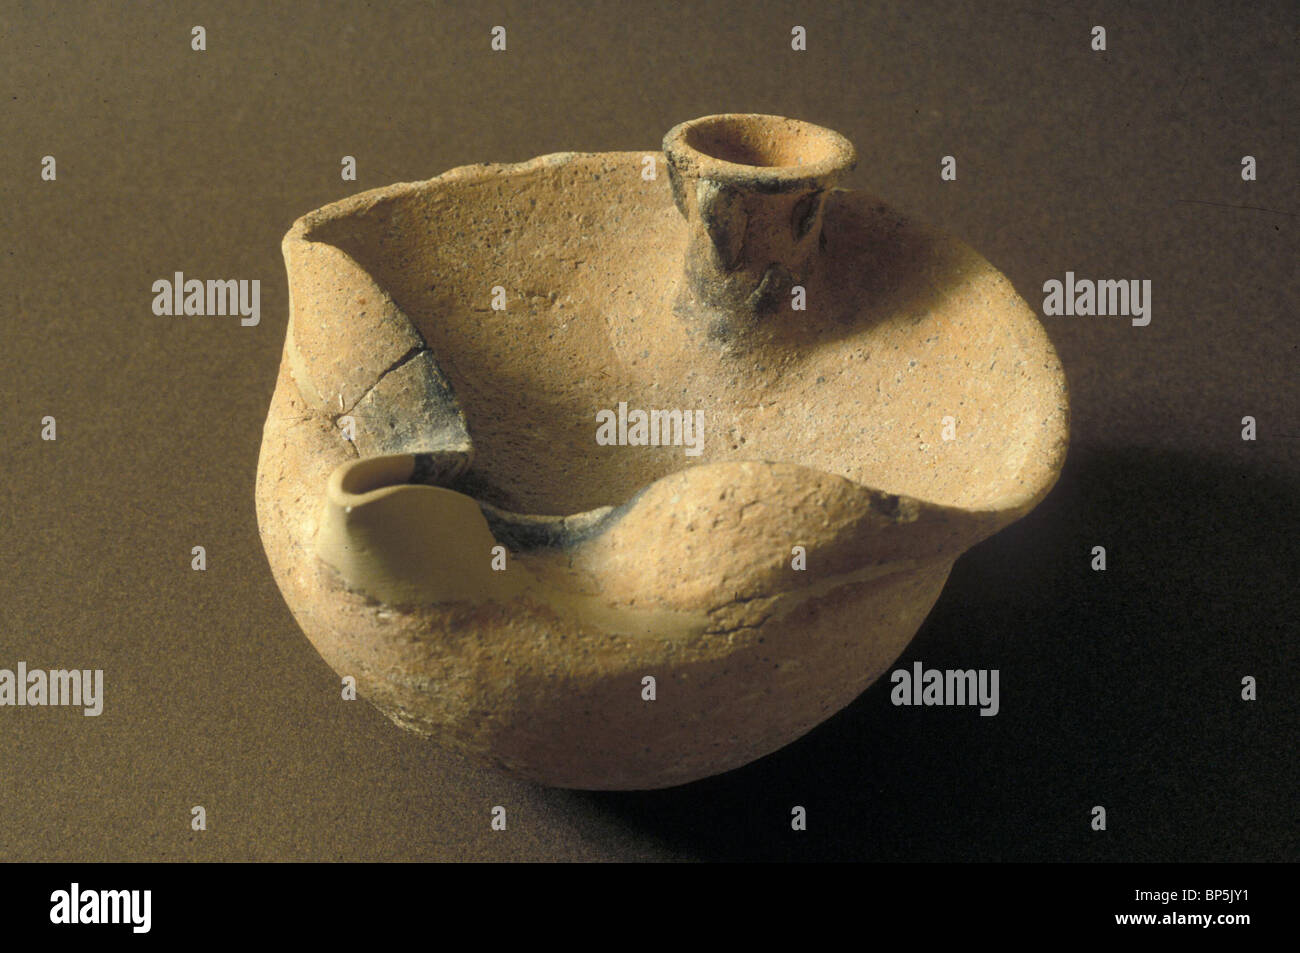 4349. CNAANITE PERIOD OIL LAMP DECORATED WITH A FACE Stock Photo